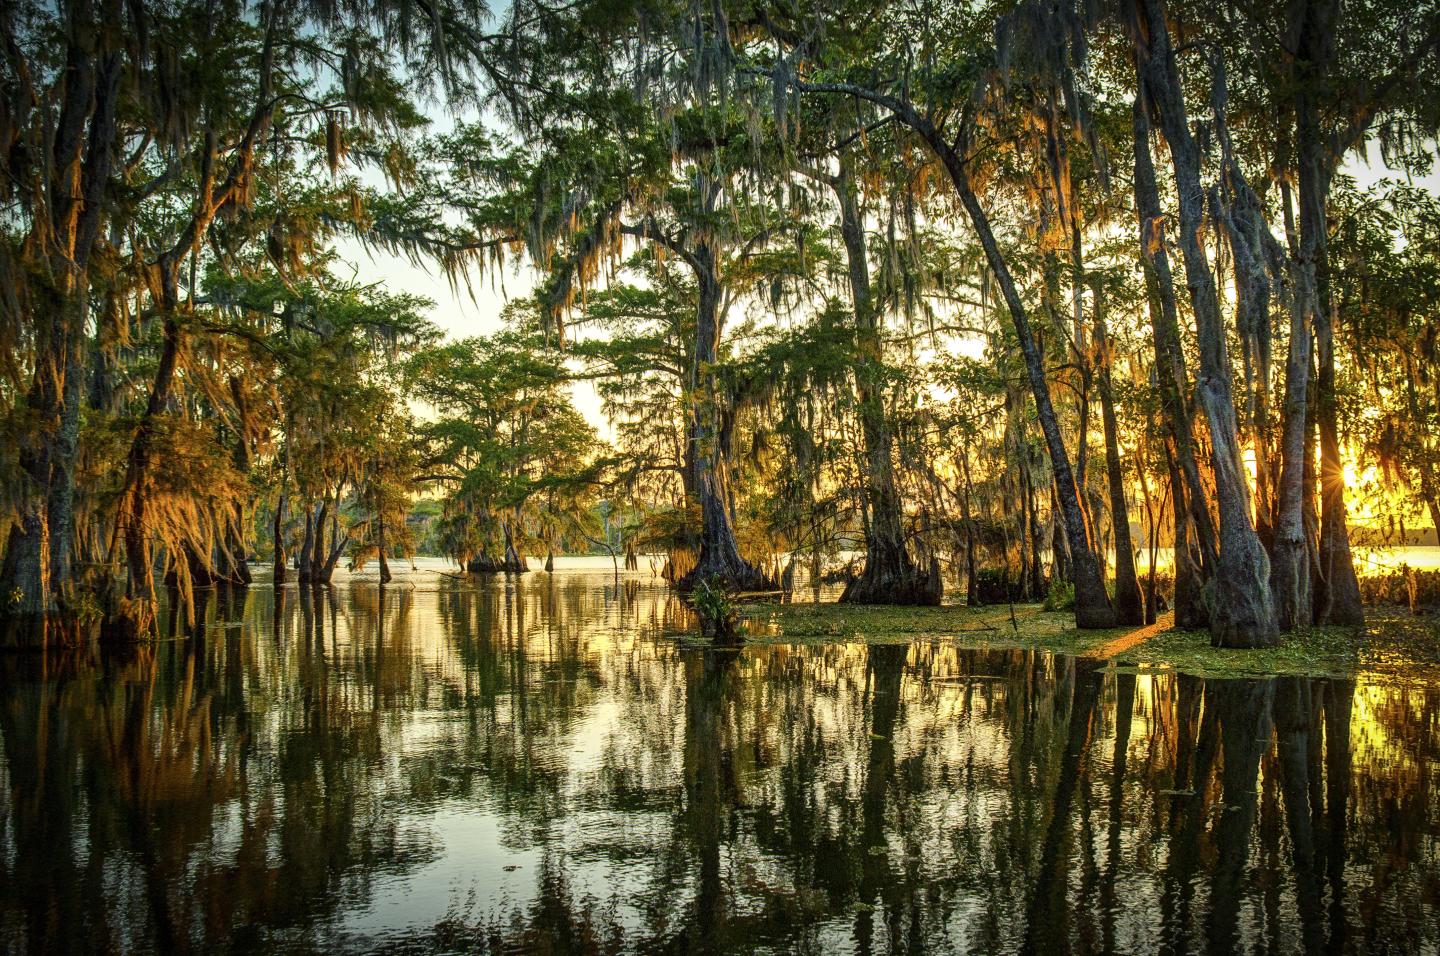 Trees rising out of reflective water in wetlands